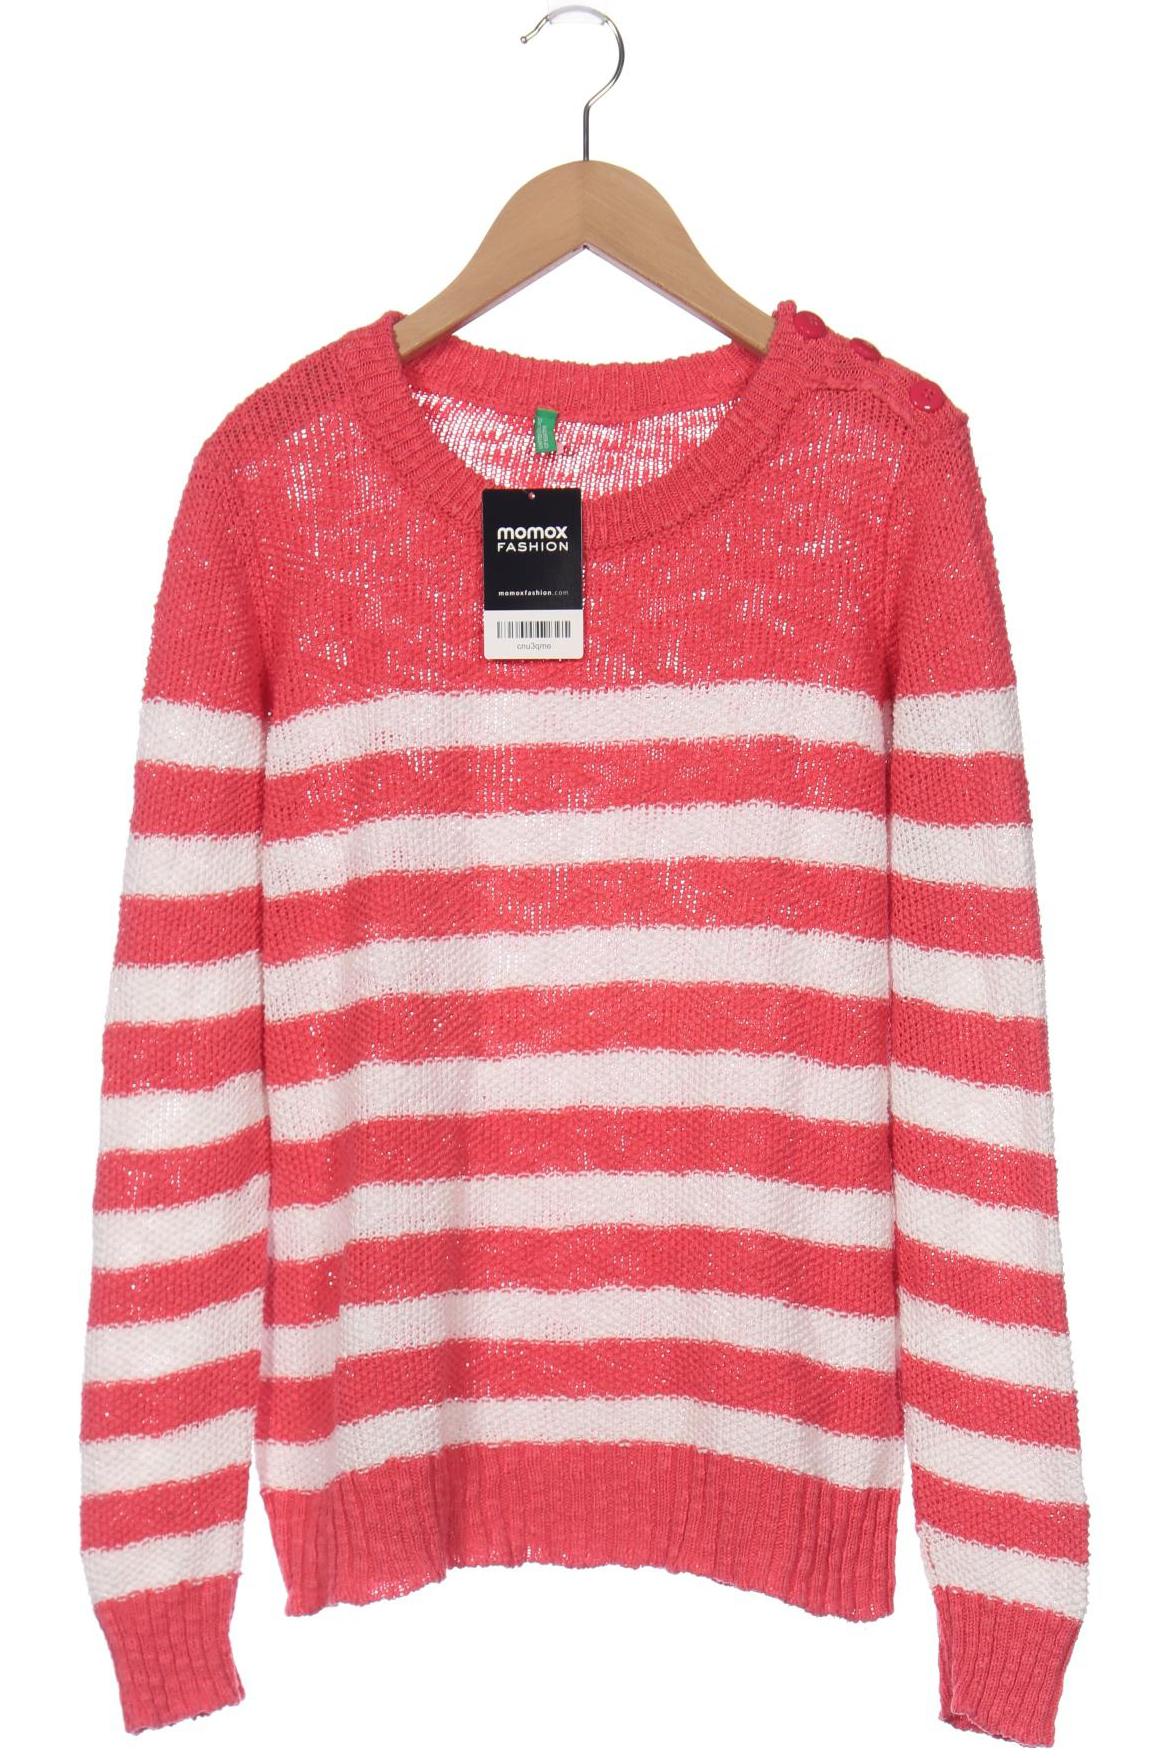 United Colors OF Benetton Damen Pullover, pink, Gr. 38 von United Colors of Benetton